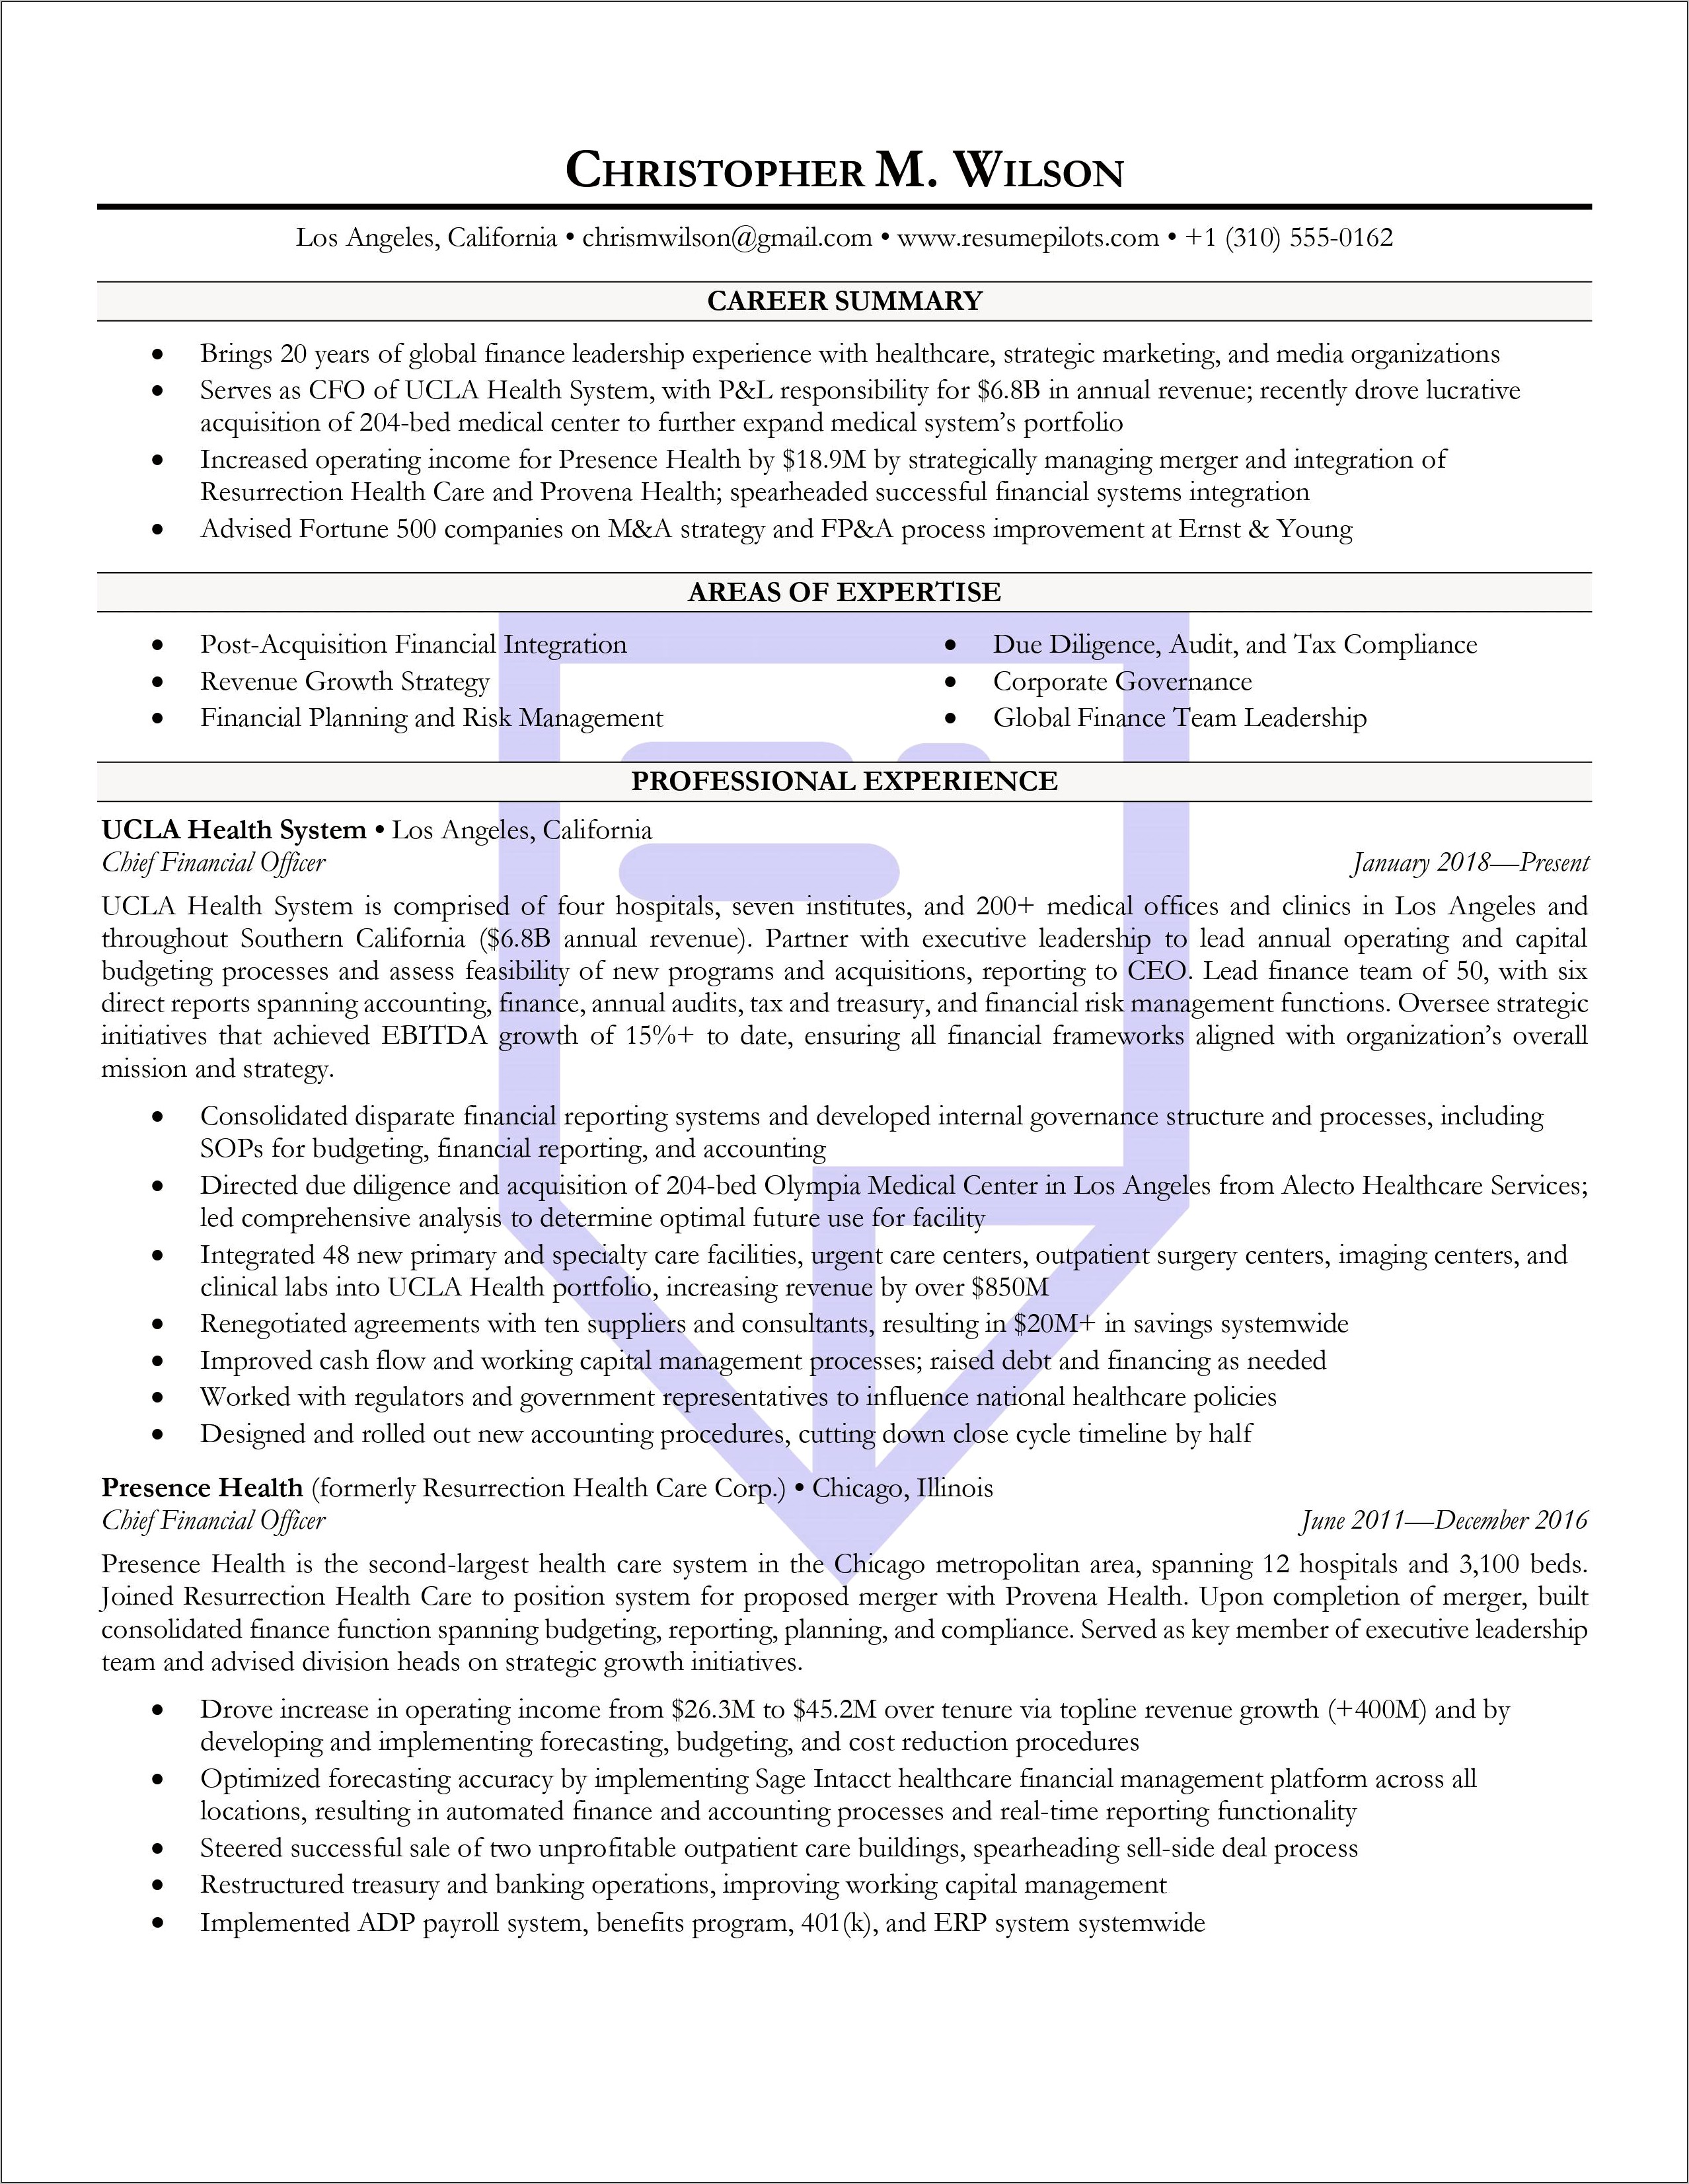 Resume Writing For Research Experience Tab